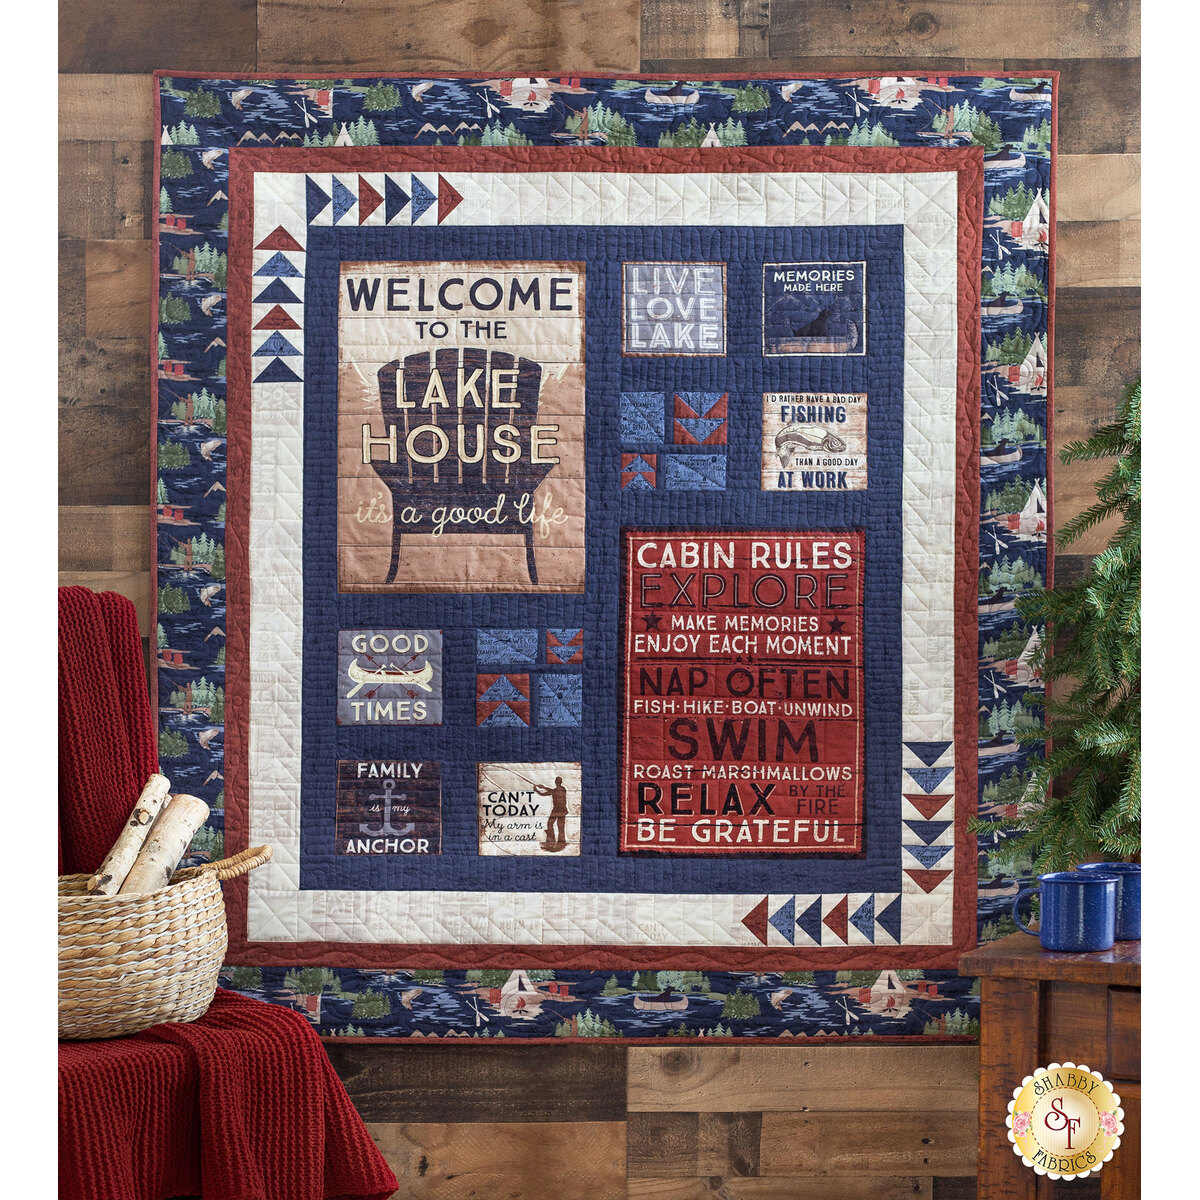 A Layer Cake and a Panel 2 Quilt Kit with Once Upon a Christmas